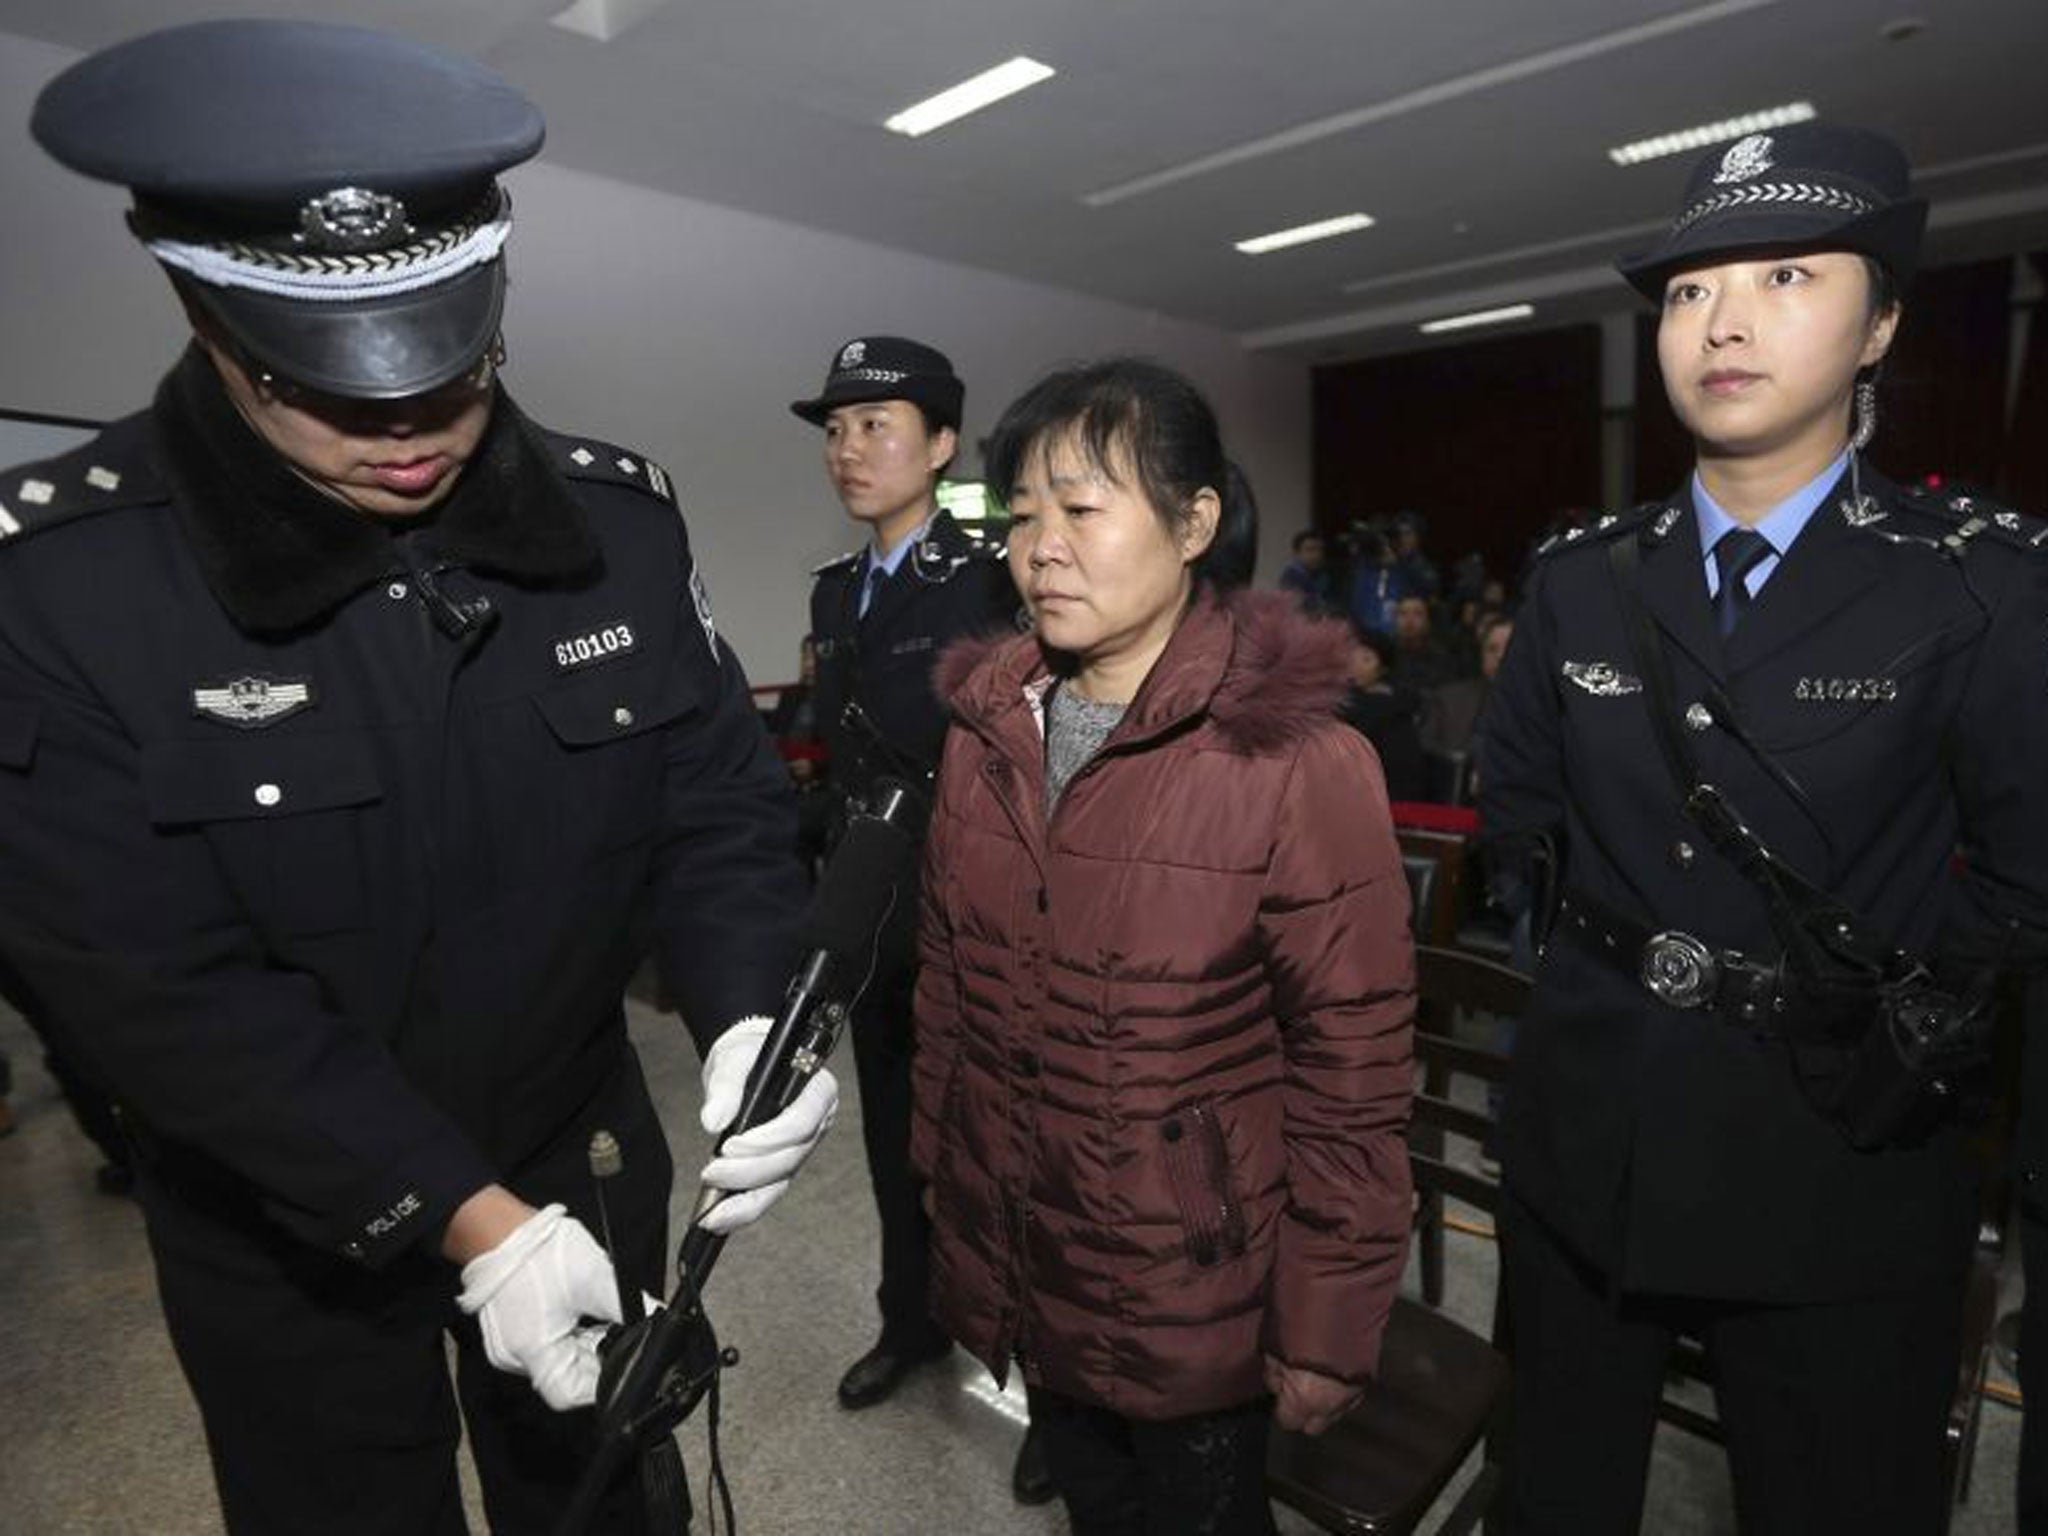 Zhang Shuxia, an obstetrician found guilty of selling babies for human trafficking